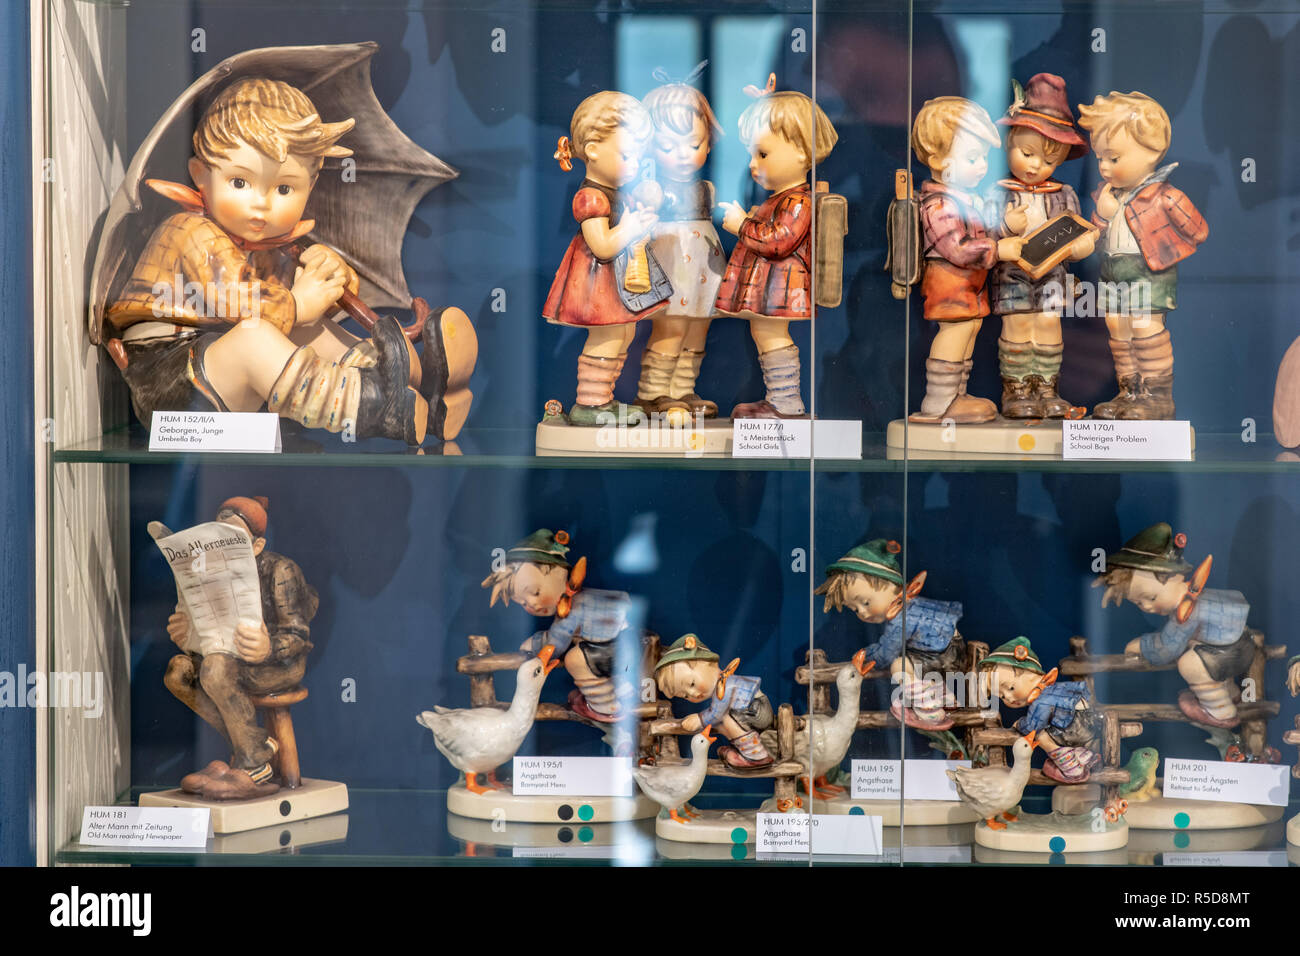 Massing, Germany. 29th Nov, 2018. Hummel porcelain figures stand in a  showcase in the Berta Hummel